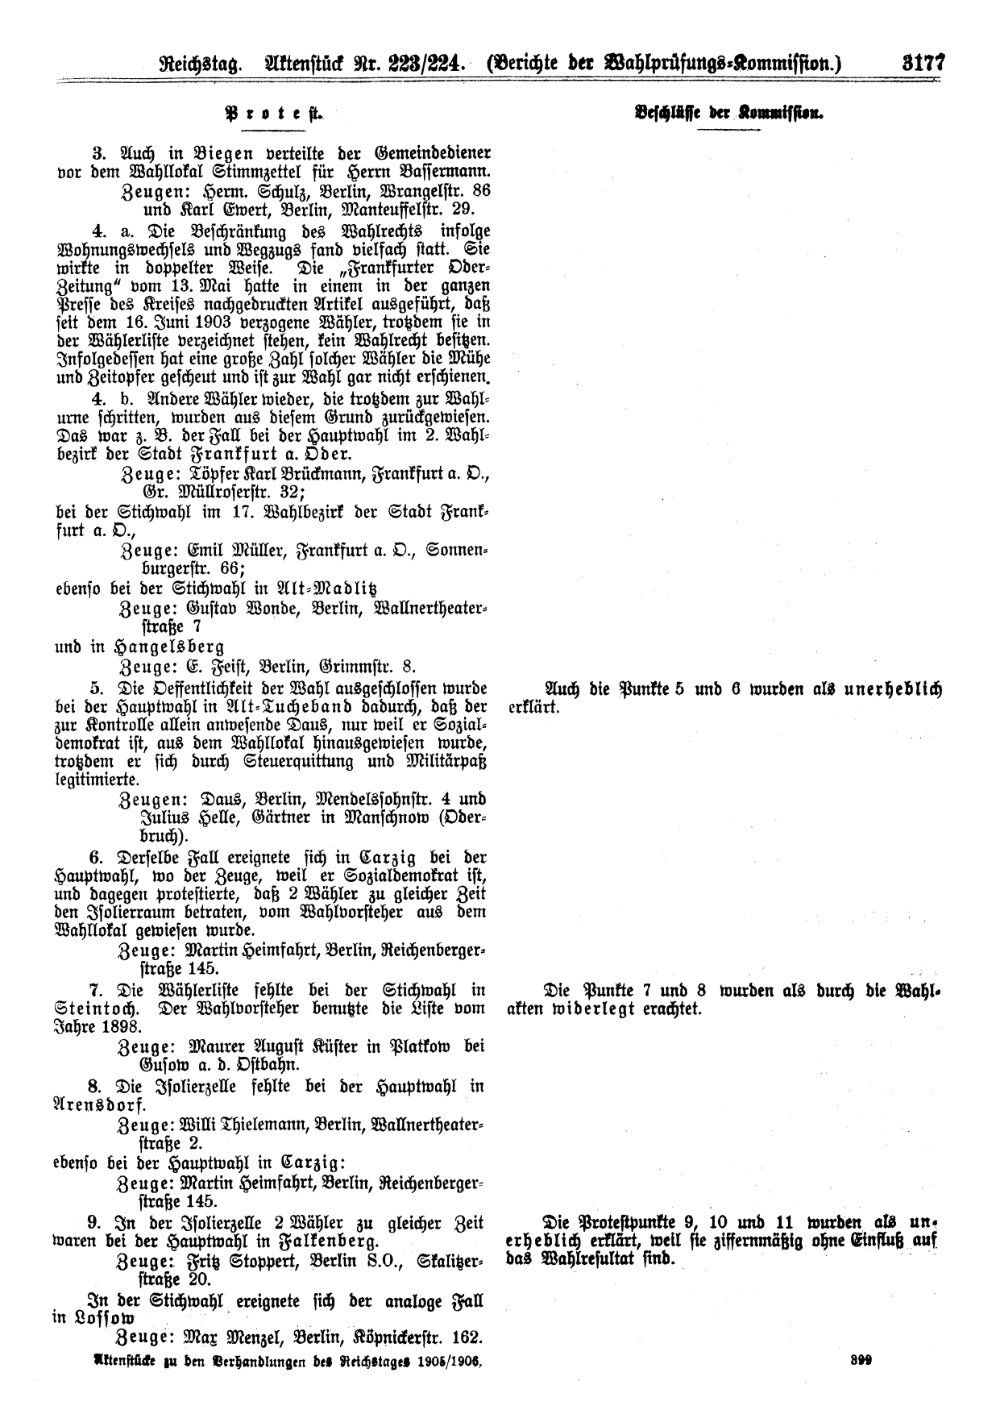 Scan of page 3177